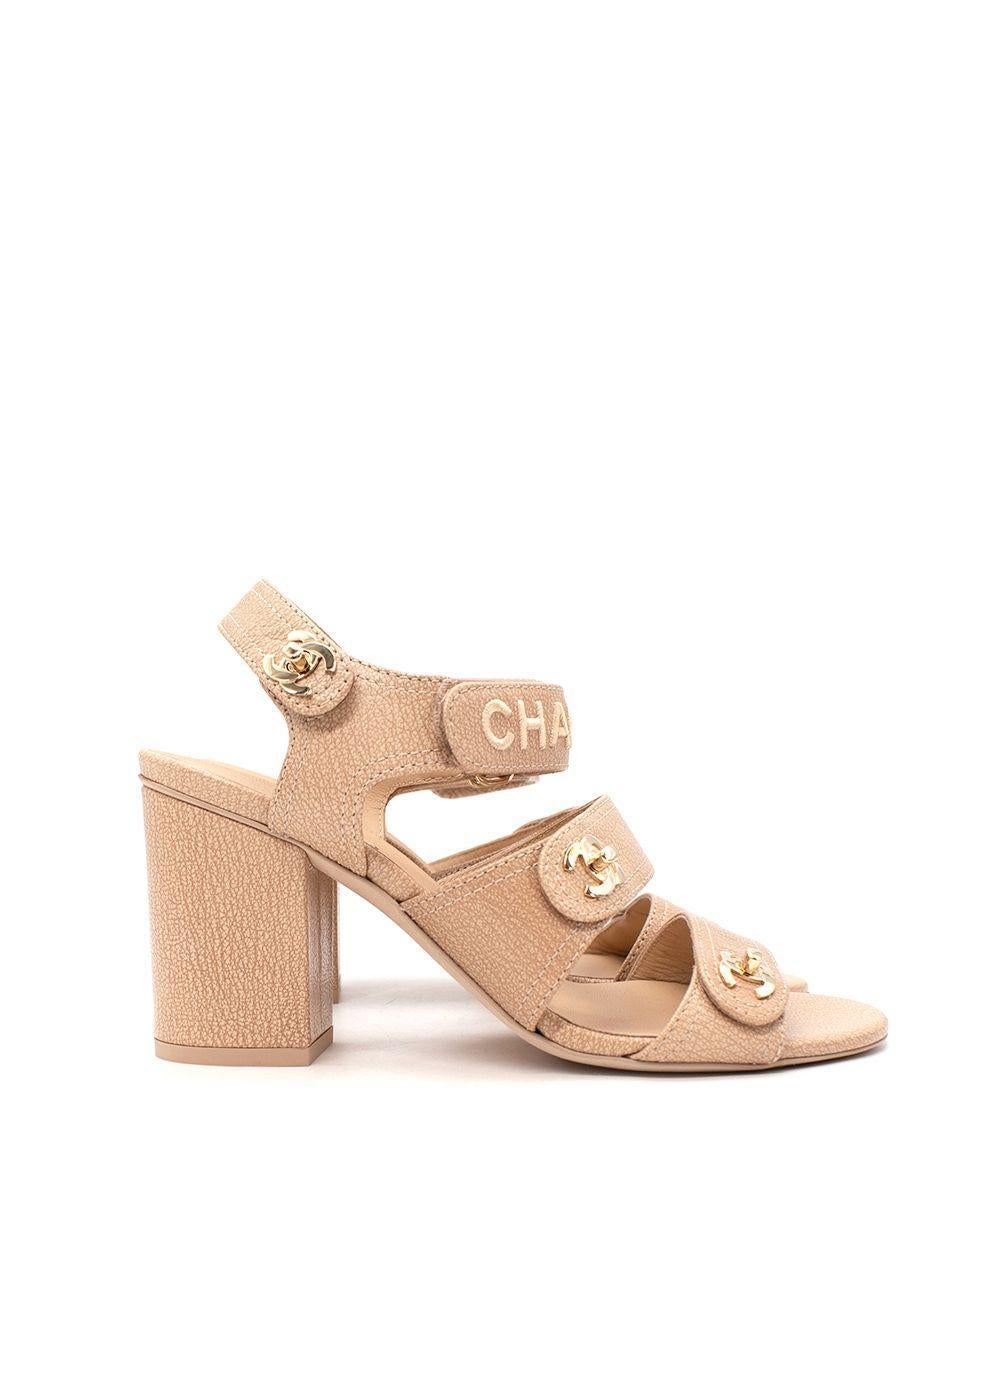 Chanel Nude Leather CC Velcro Strap Block Heeled Sandals

- Dad-style sandals with 3 foot straps, 1 velcro, and 2 featuring the signature CC twistlock
- Logo embroidered
- Set on mid-height block heel
- Leather lined, leather